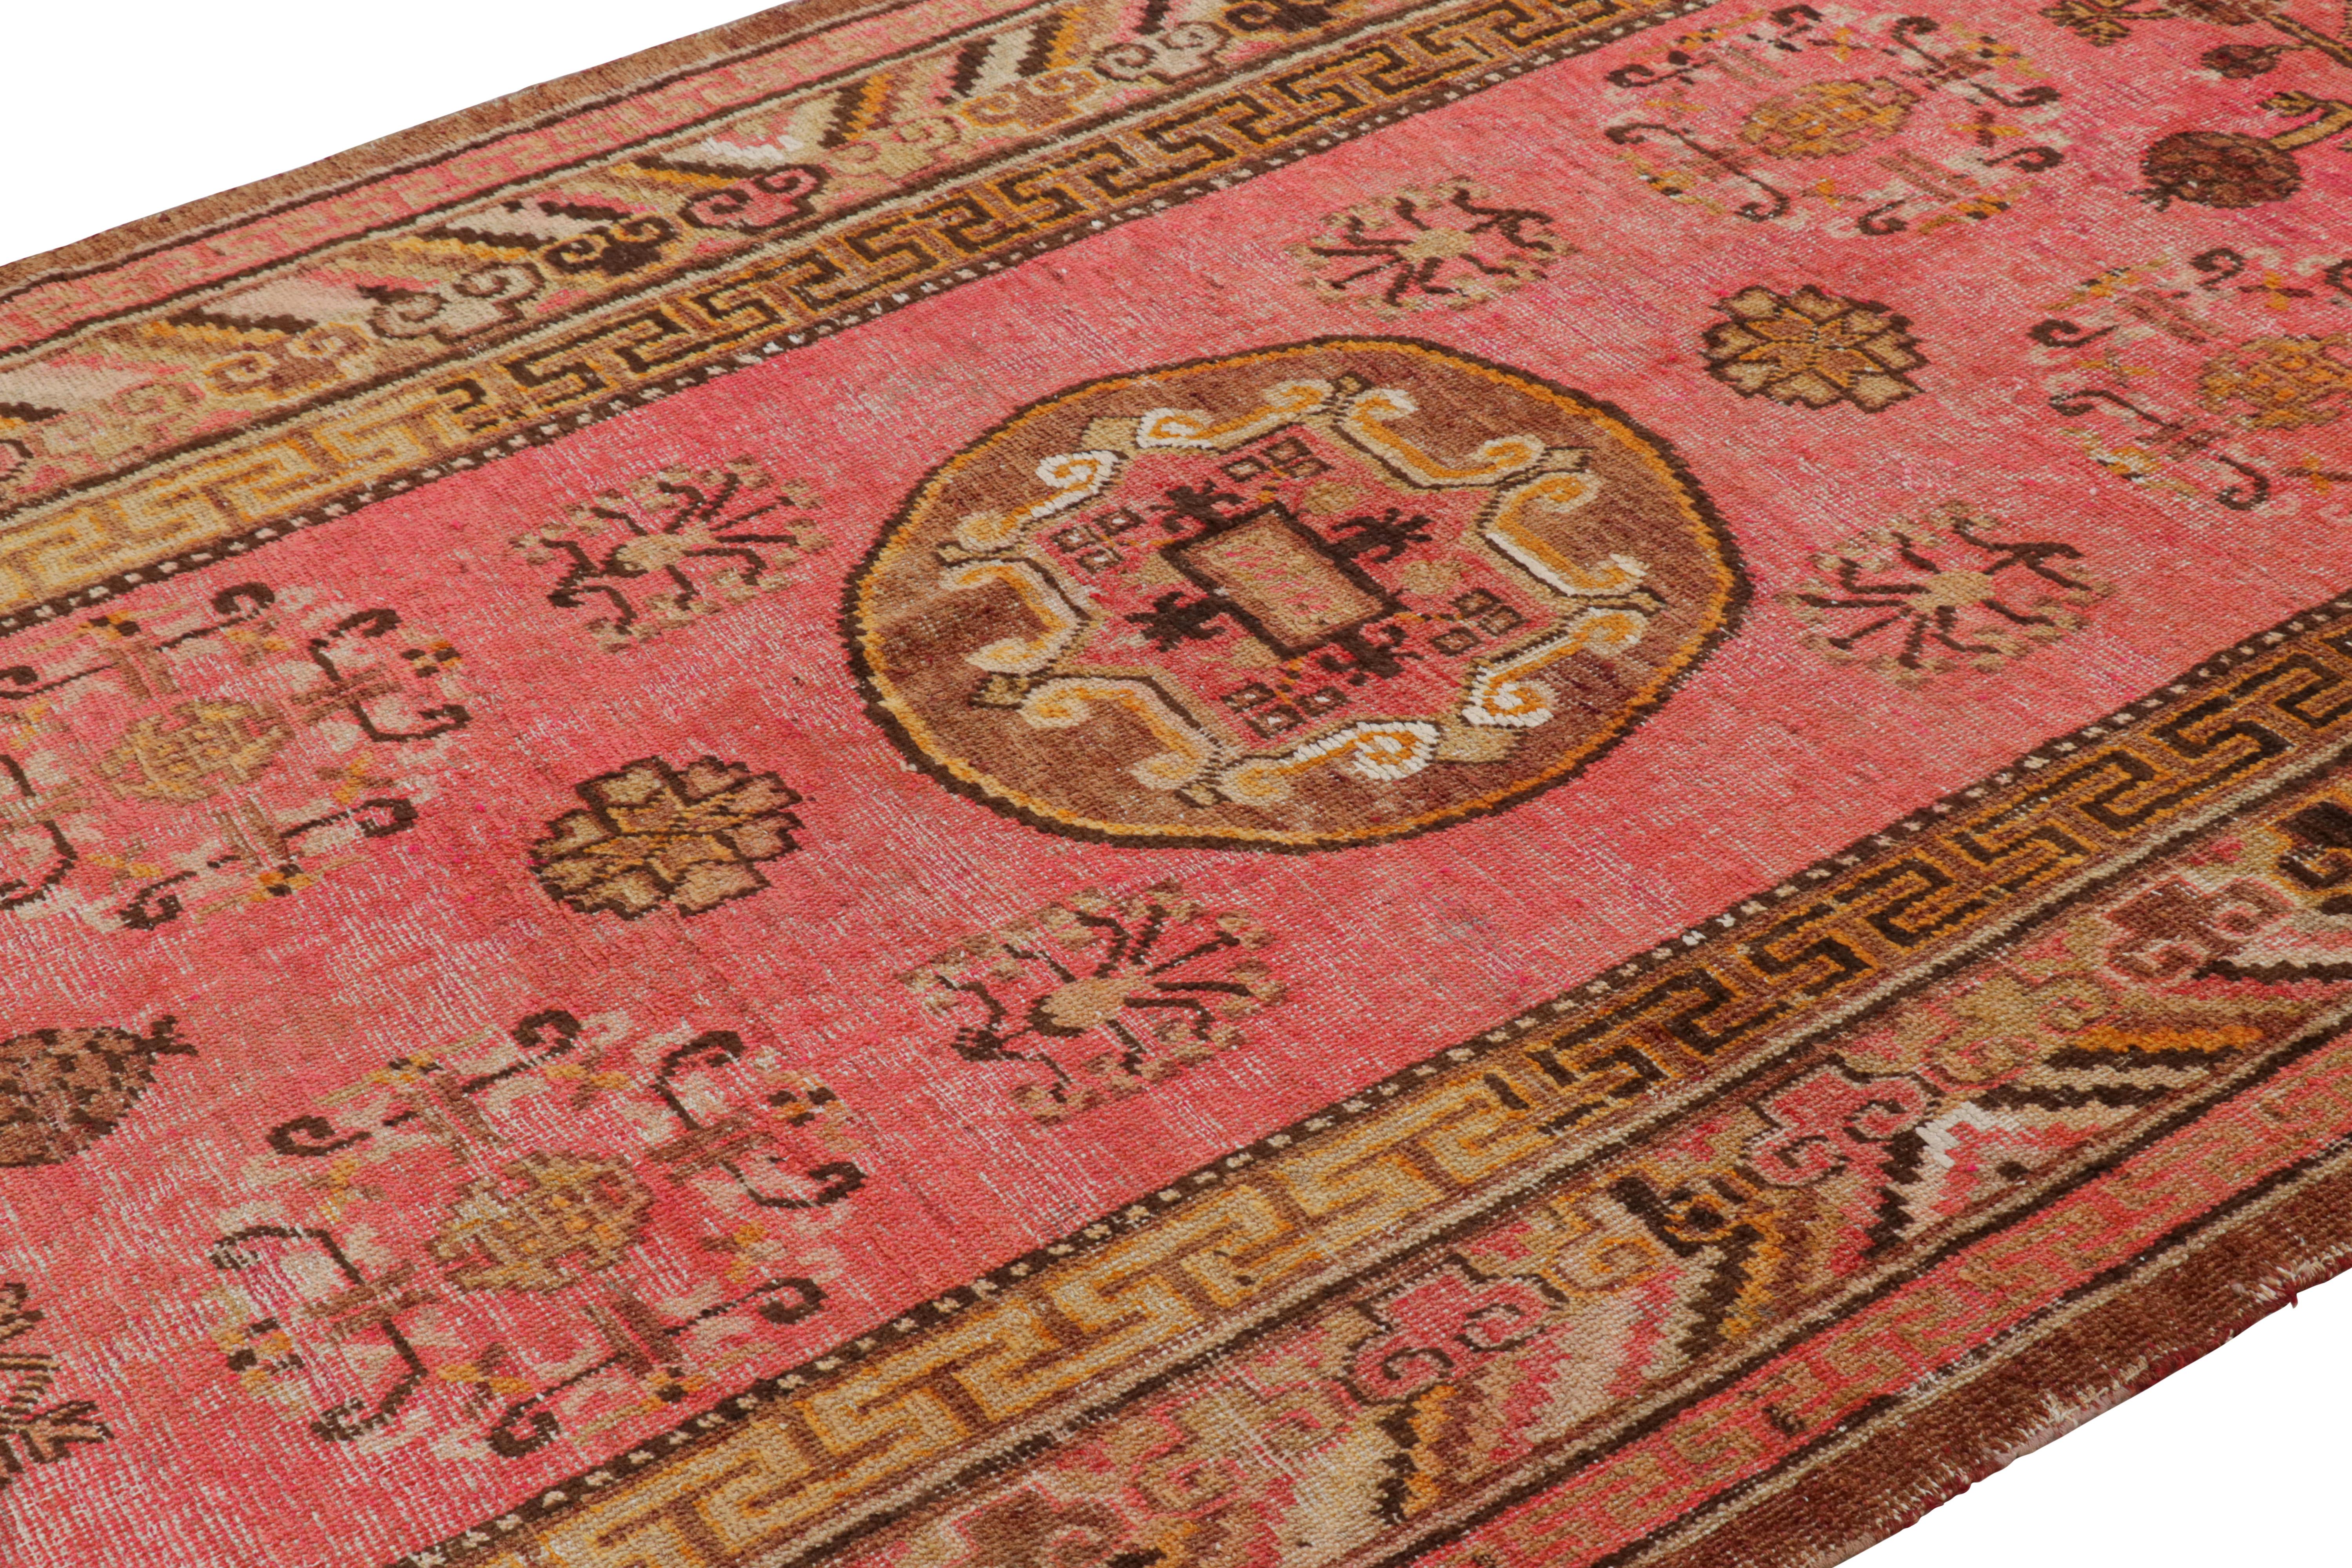 Originating from East Turkestan between 1920-1940, this antique transitional Khotan rug from Rug & Kilim has an abundance of distinct Chinese imagery throughout its borders. Hand woven in high quality wool, the golden-brown medallion design of the